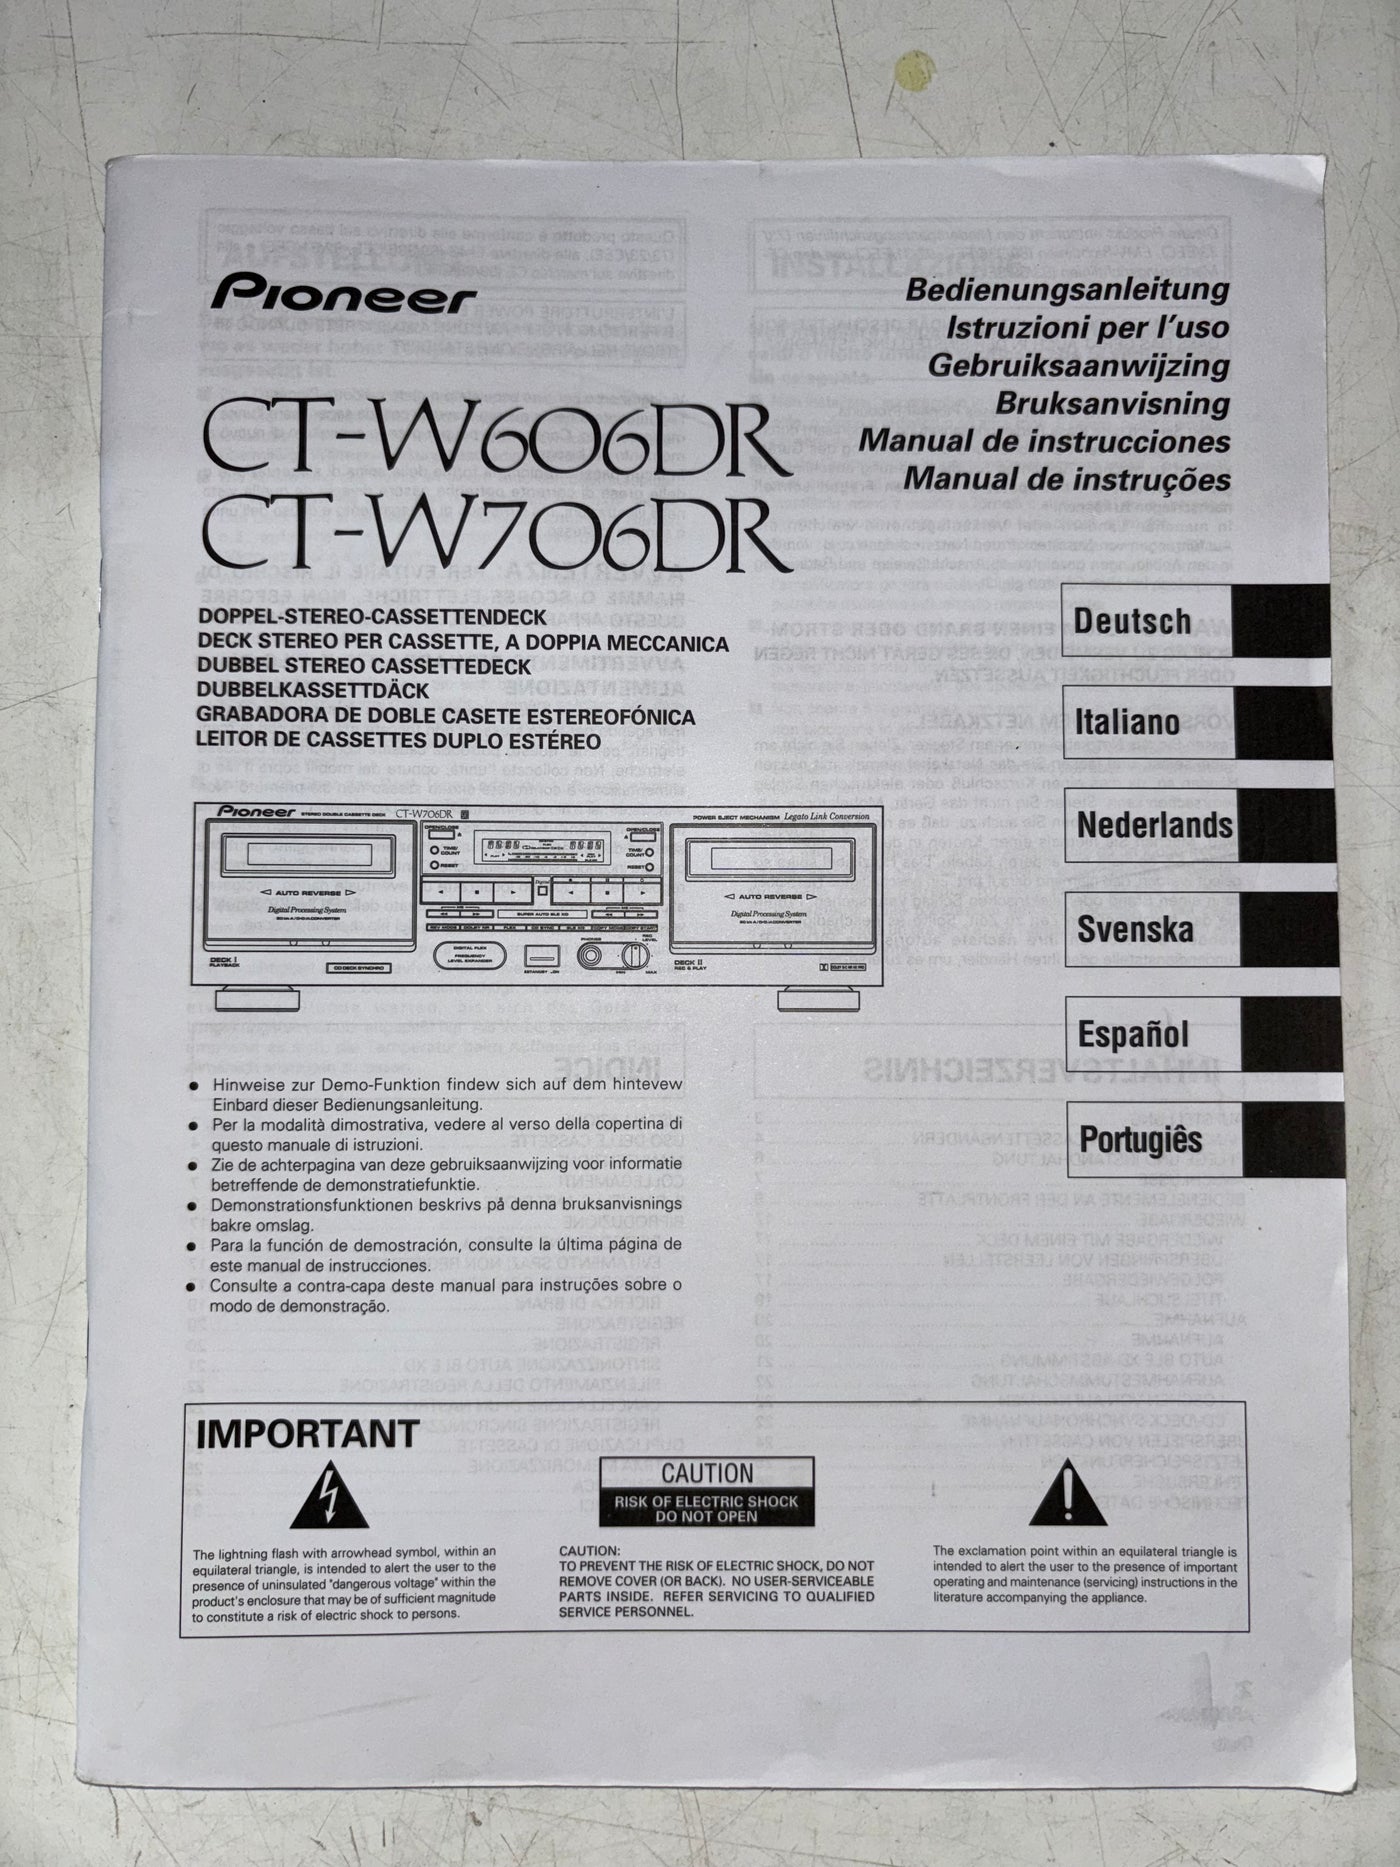 Pioneer CT-W606DR / CT-W706DR Stereo Double Cassette Deck User Manual